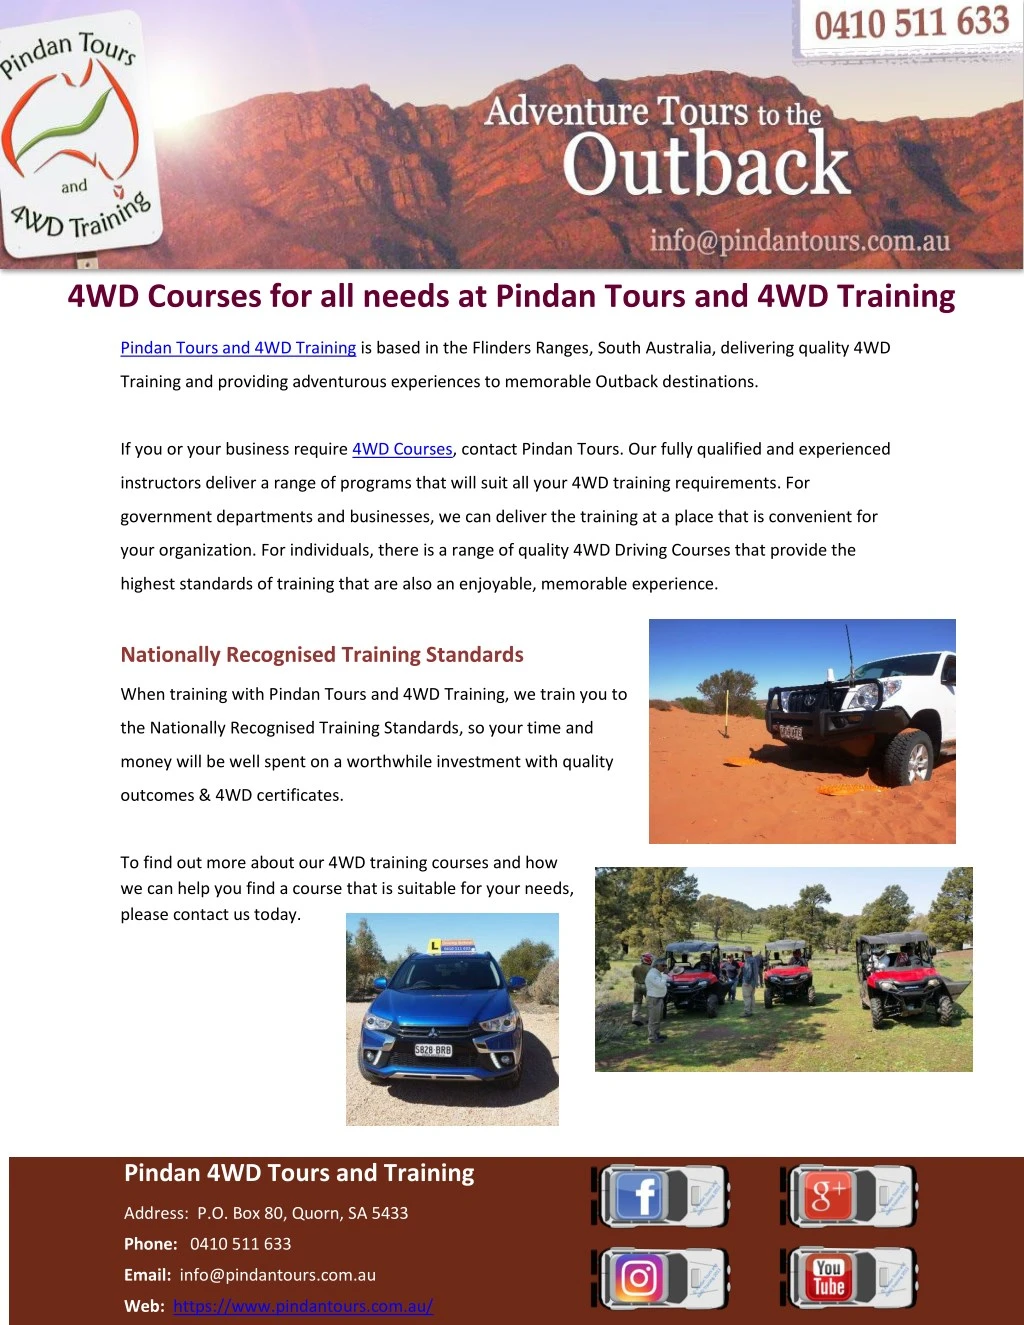 4wd courses for all needs at pindan tours